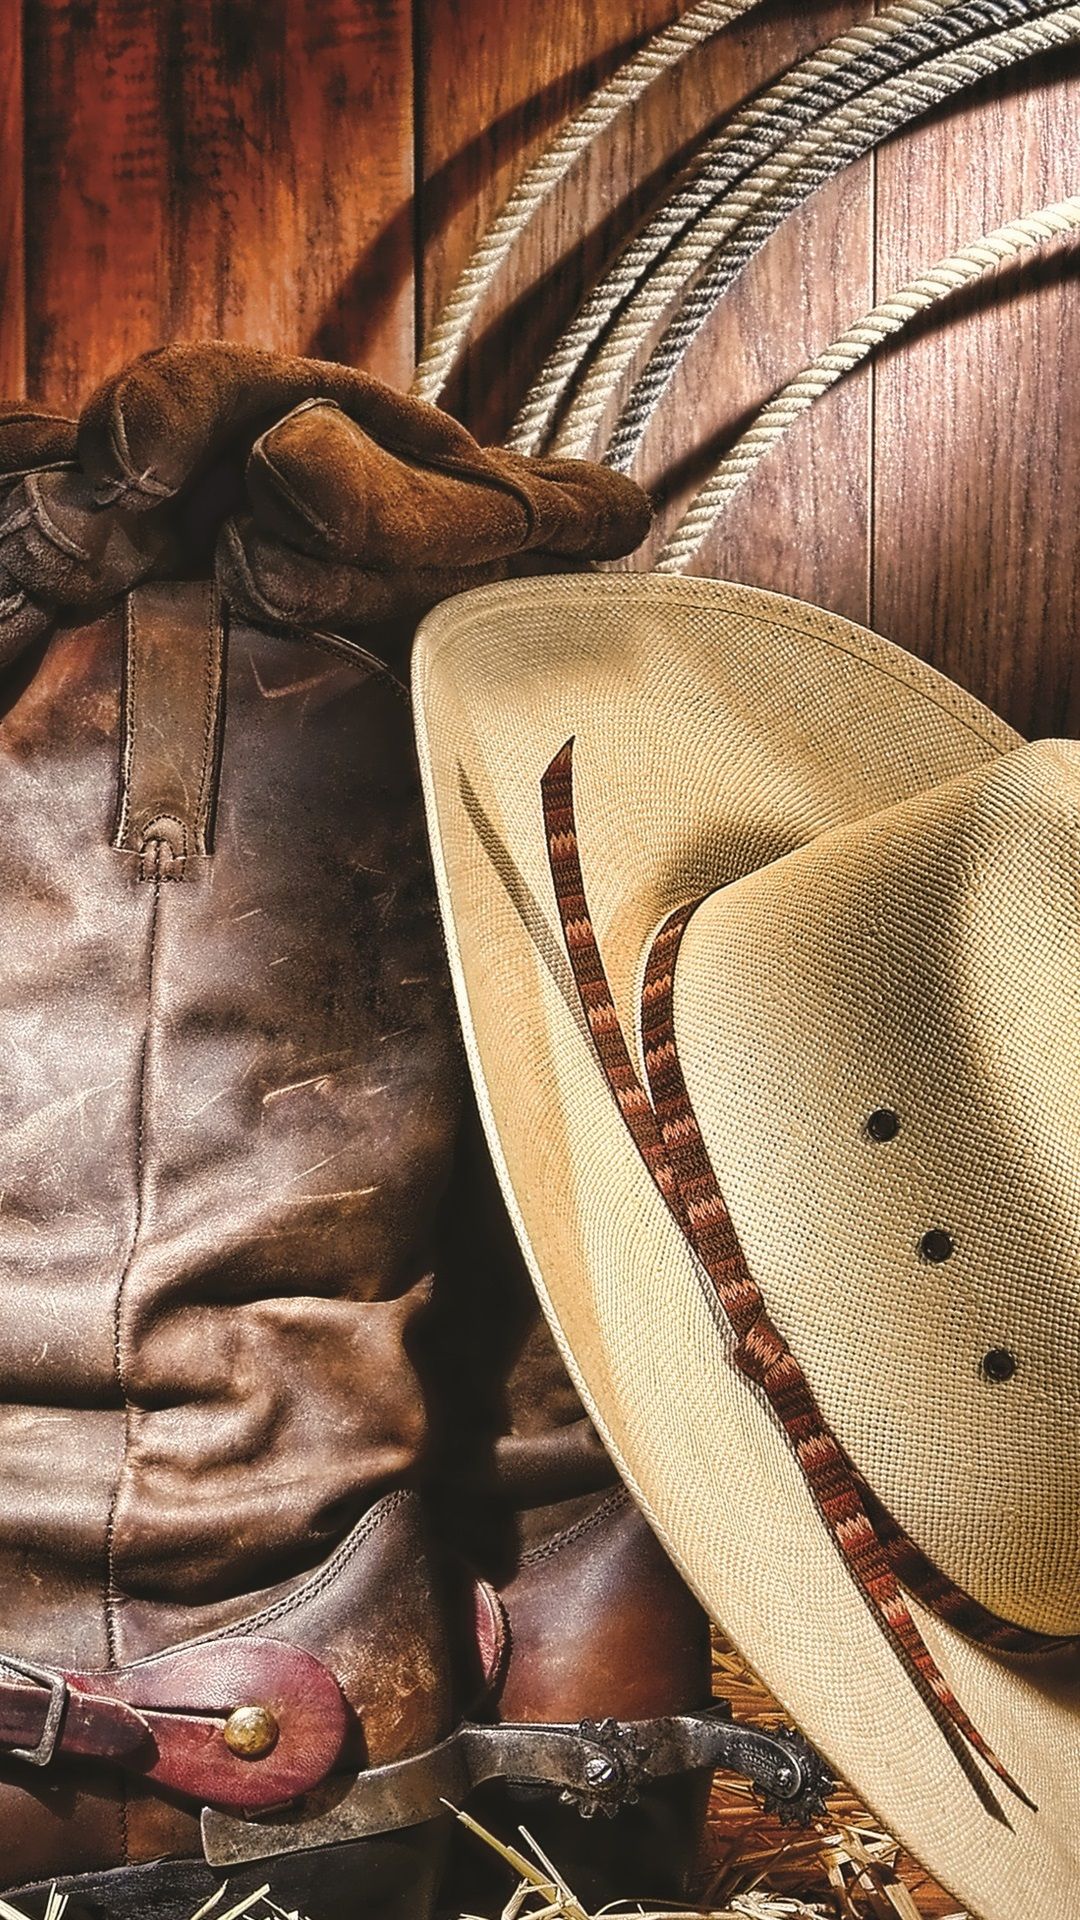 Wallpaper Cowboy shoes and hat 3840x2160 UHD 4K Picture, Image